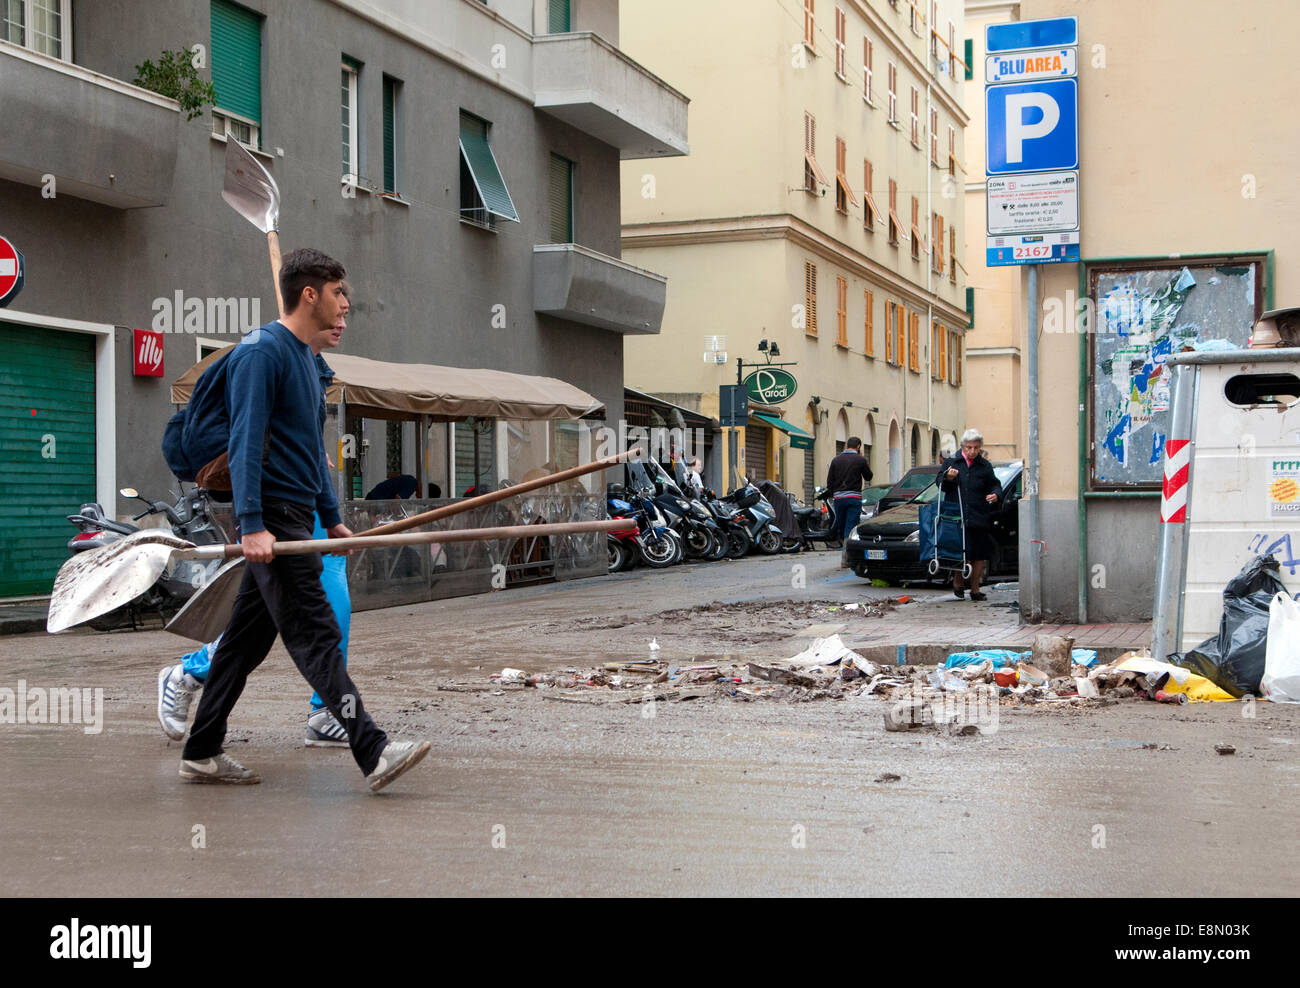 Genoa, Italy. 11th Oct, 2014. Aftermath of the flooding. At least one person died when flash floods swept through the northwestern Italian city of Genoa. Shop windows were smashed, cars washed aside and many streets were left knee deep in muddy water. Credit:  Massimo Piacentino/Alamy Live News Stock Photo